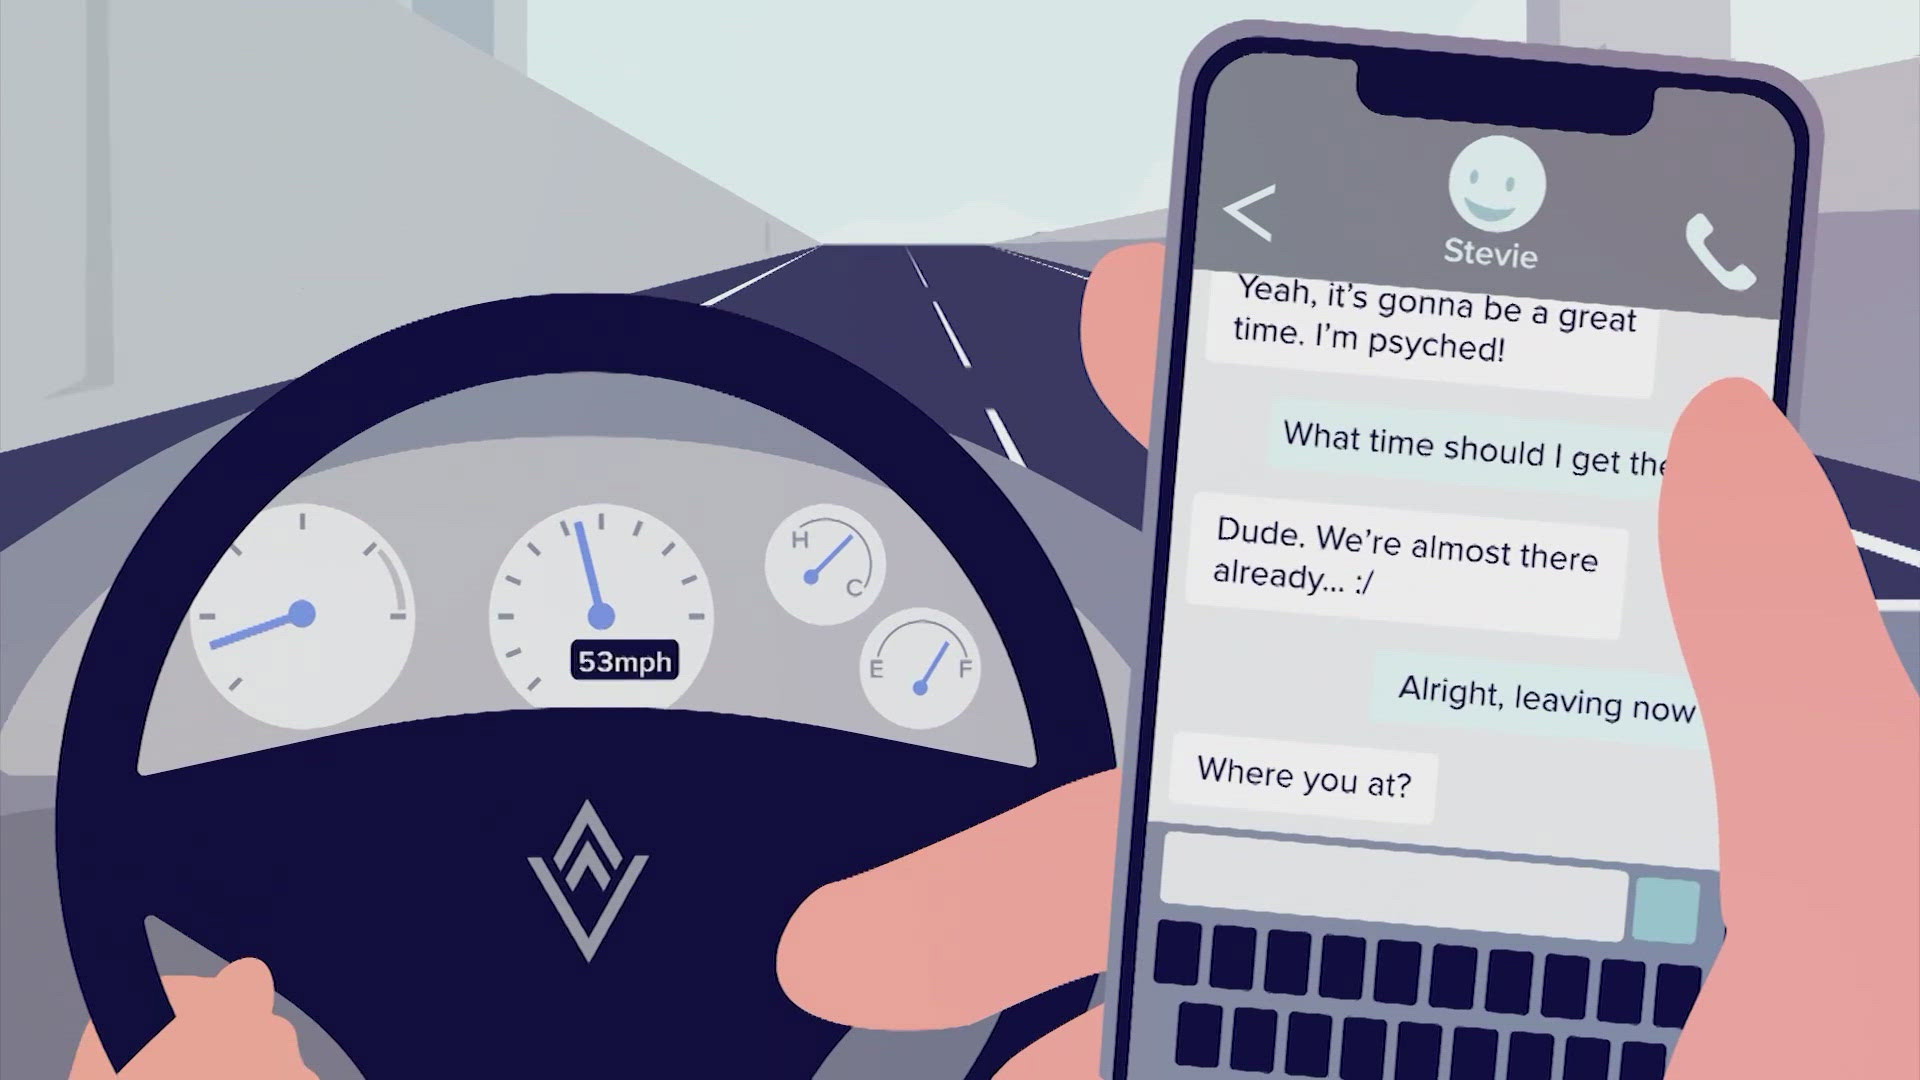 Sending a text while driving seems so simple and quick, but the reality can be devastating.